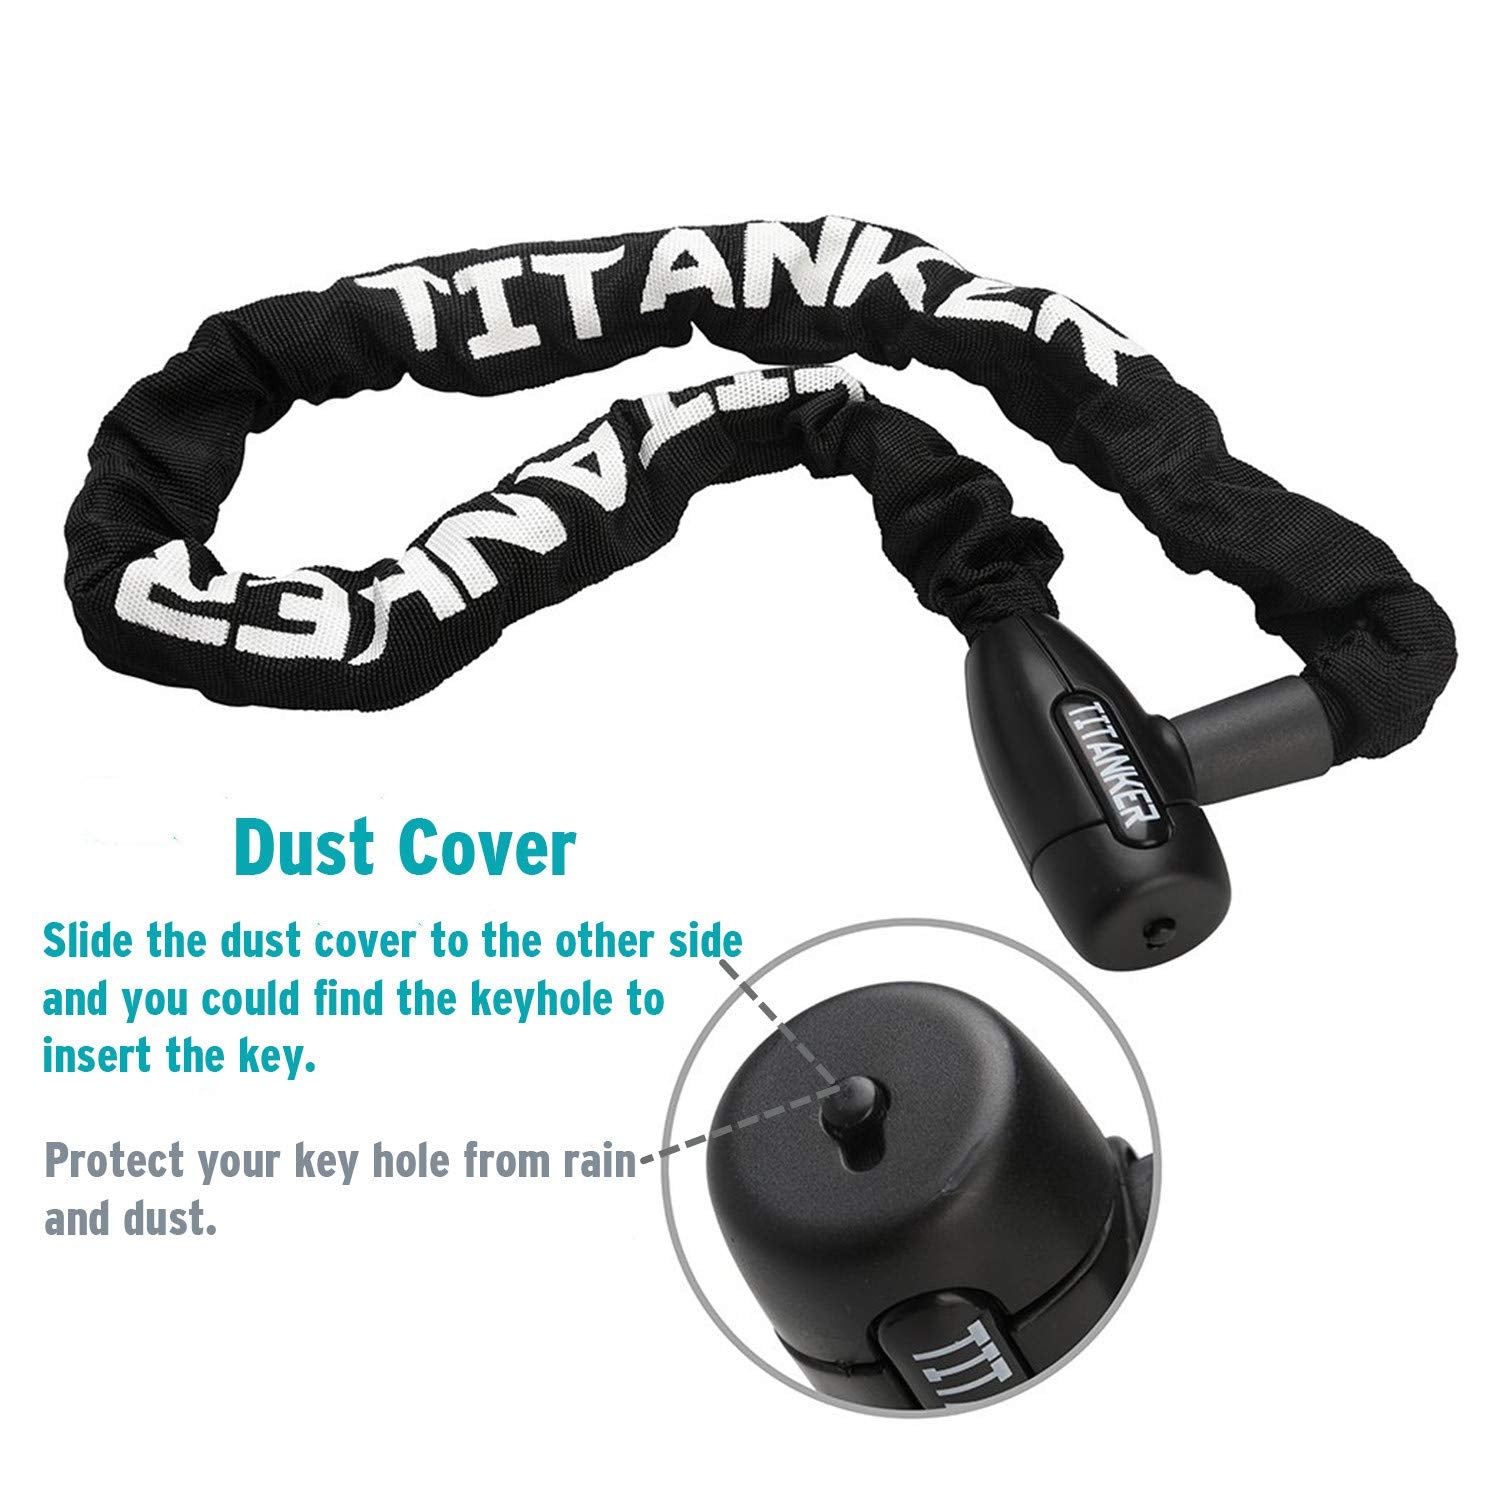 Titanker Security Anti Theft Bike Chain Lock For Motorcycle Bicycle Titanker Official